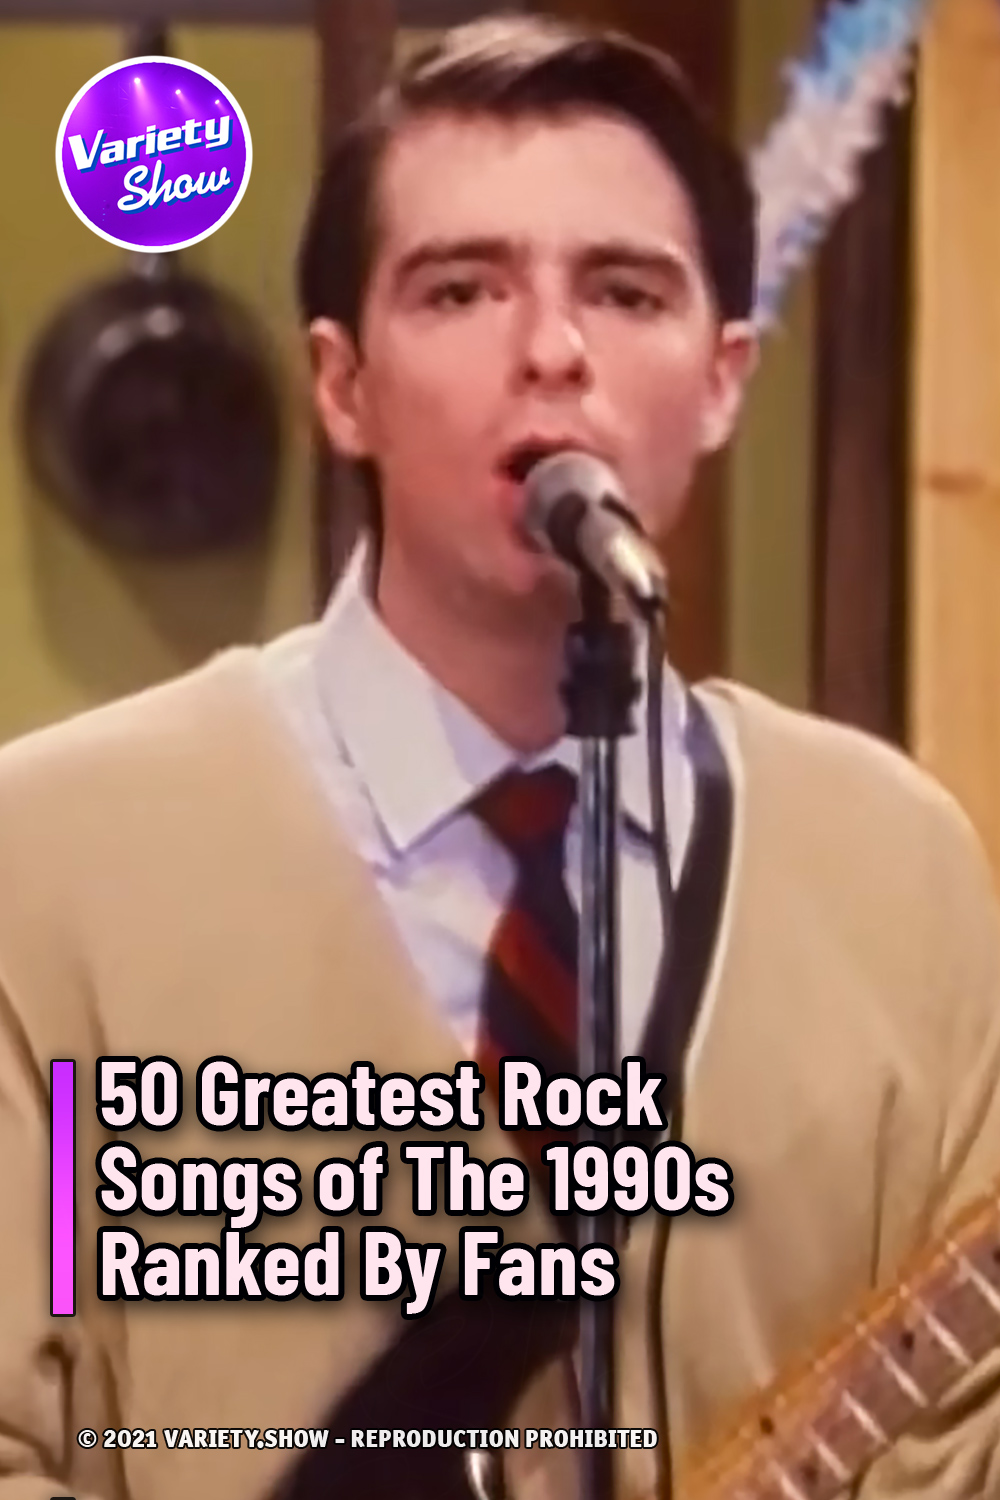 50 Greatest Rock Songs of The 1990s Ranked By Fans